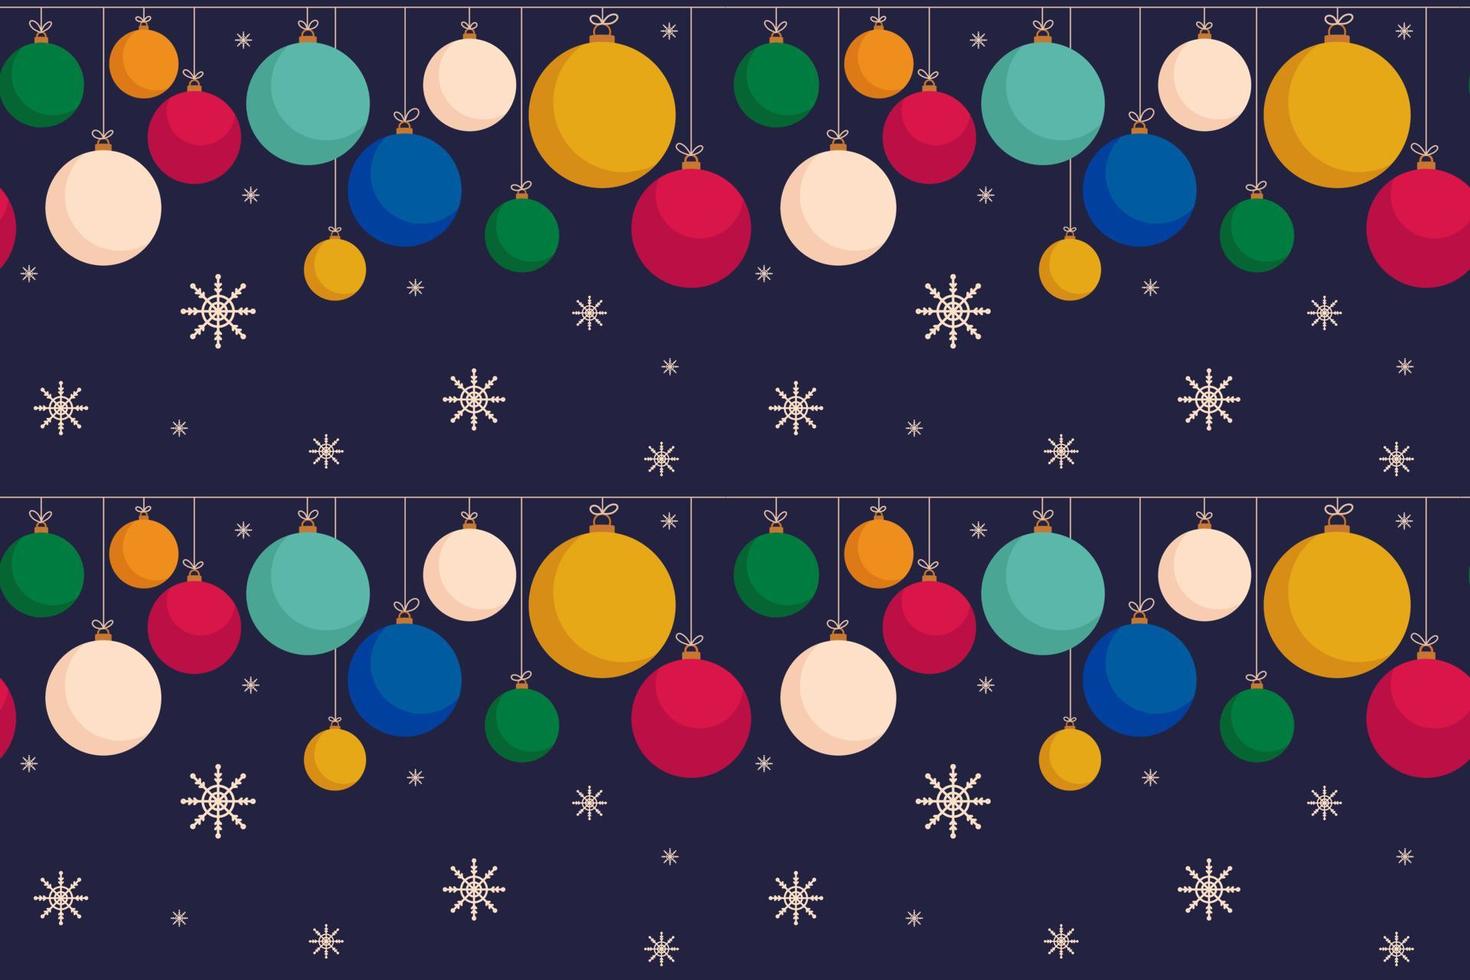 Seamless pattern of hanging multicolored Christmas balls on dark background. Garland of Christmas tree toys. Design for gift wrapping, textiles, wallpaper. New Year's background. Vector illustration